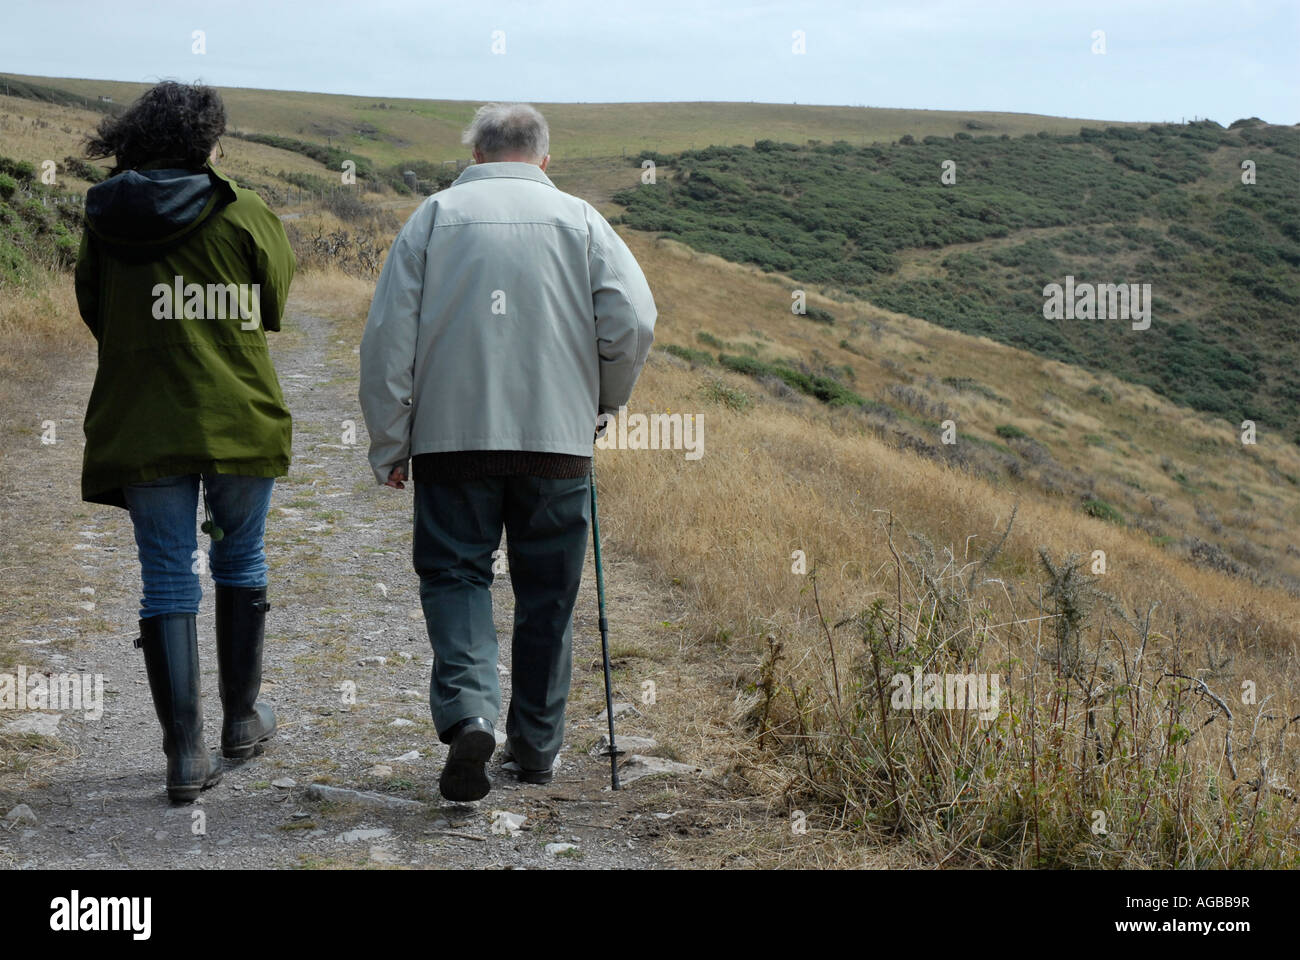 Rear view of two people walking together in the countryside Stock Photo